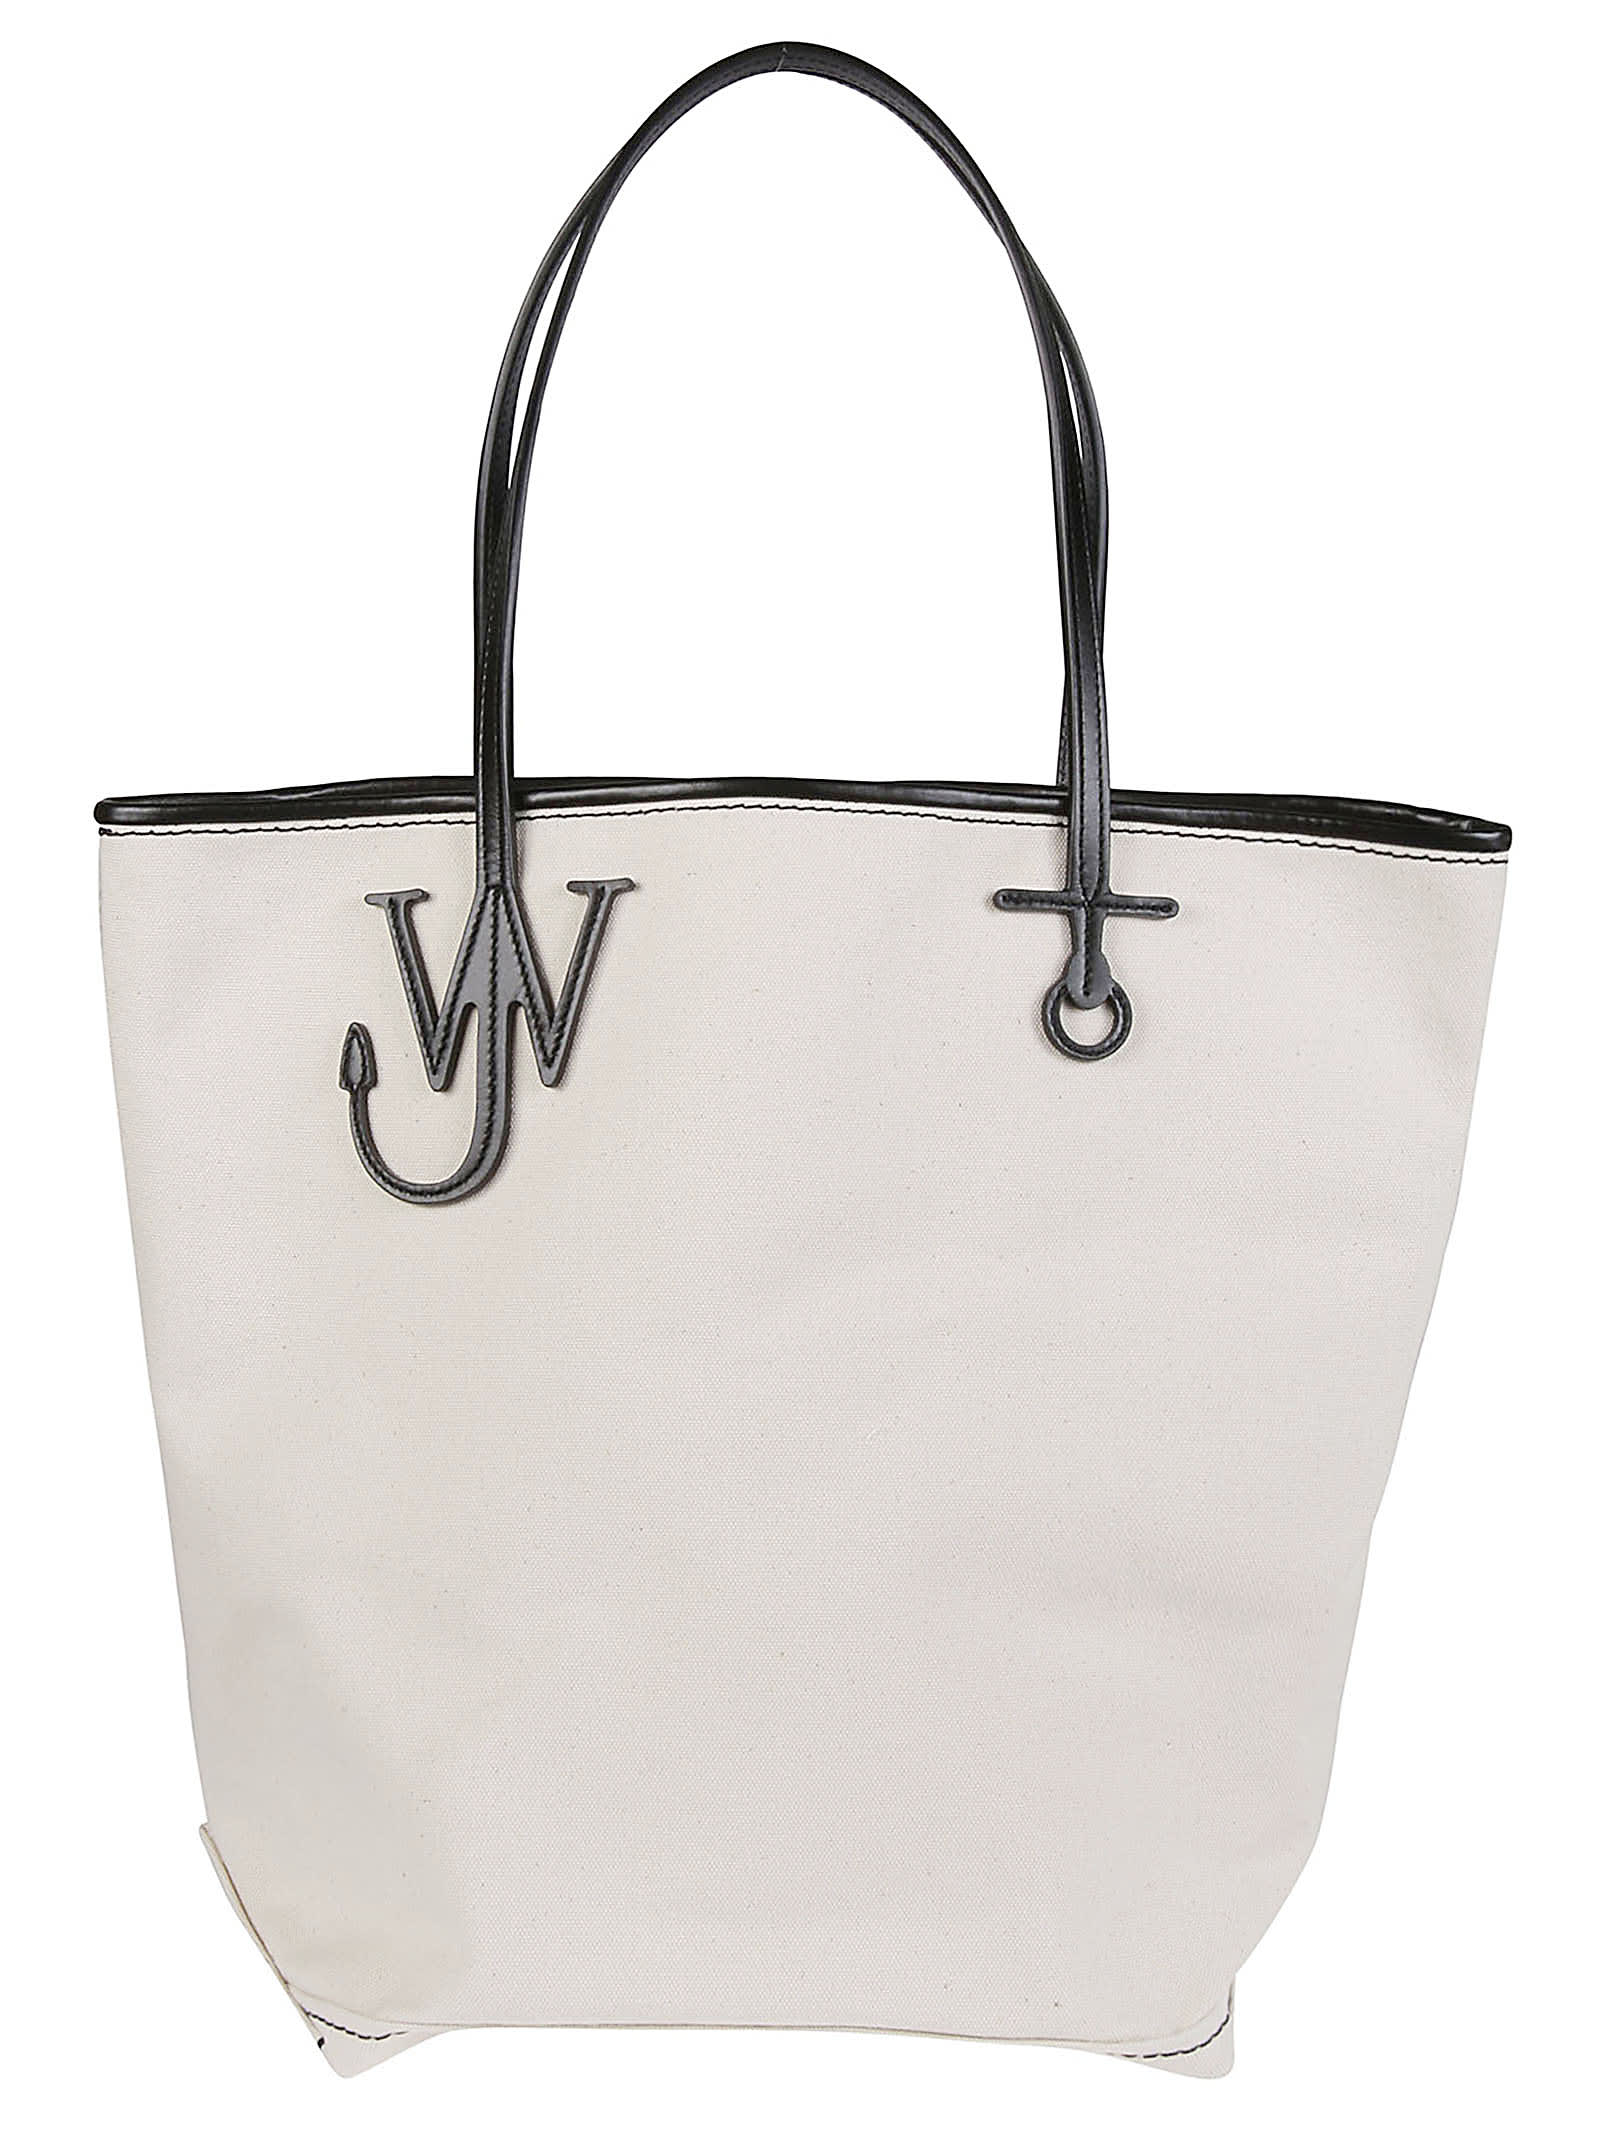 Jw Anderson Tall Anchor Tote - Canvas Tote Bag In White/black